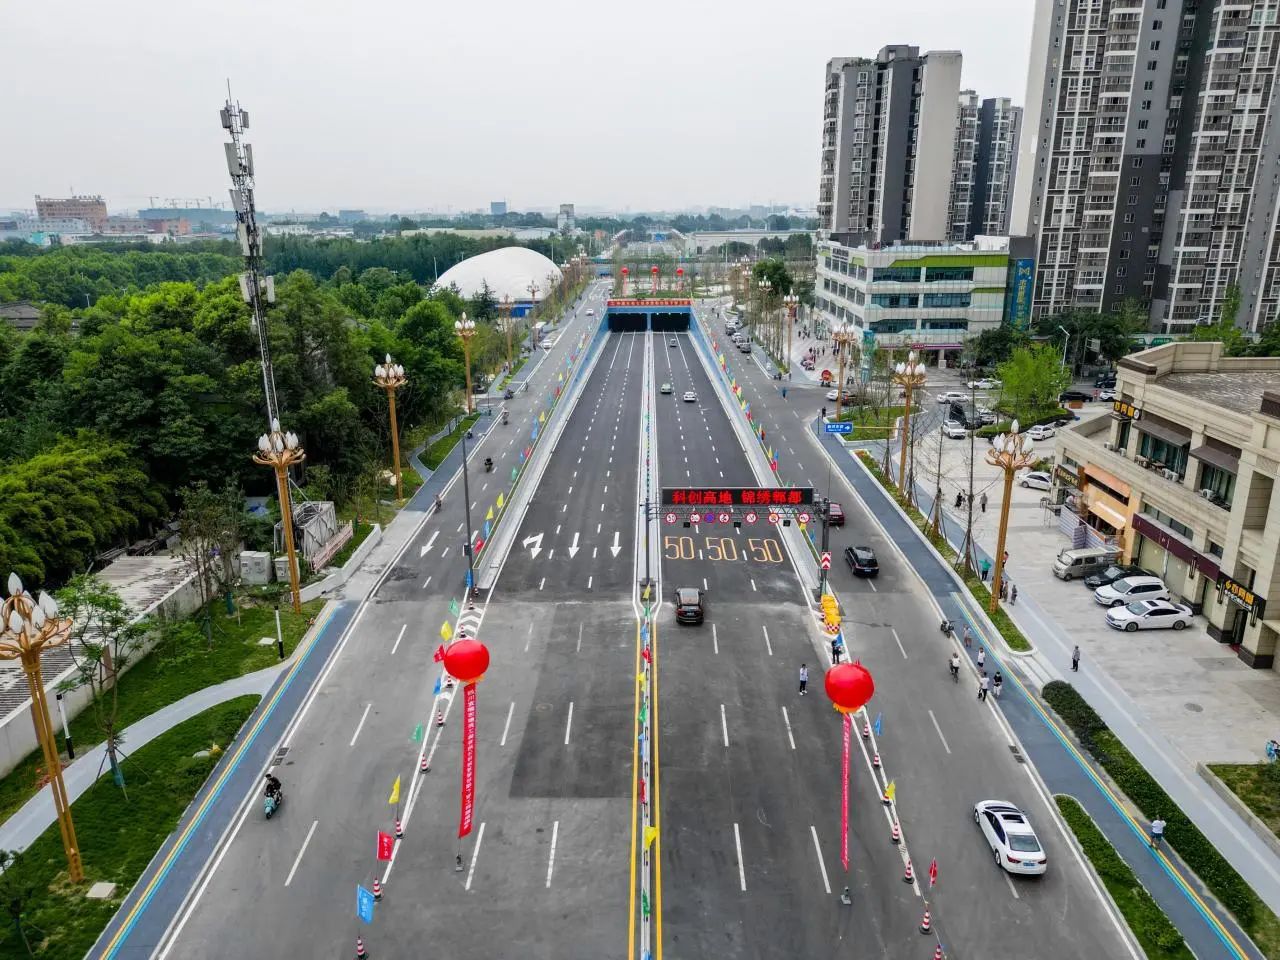 Another IOL-equipped single-lamp controller road smoothly opens to traffic